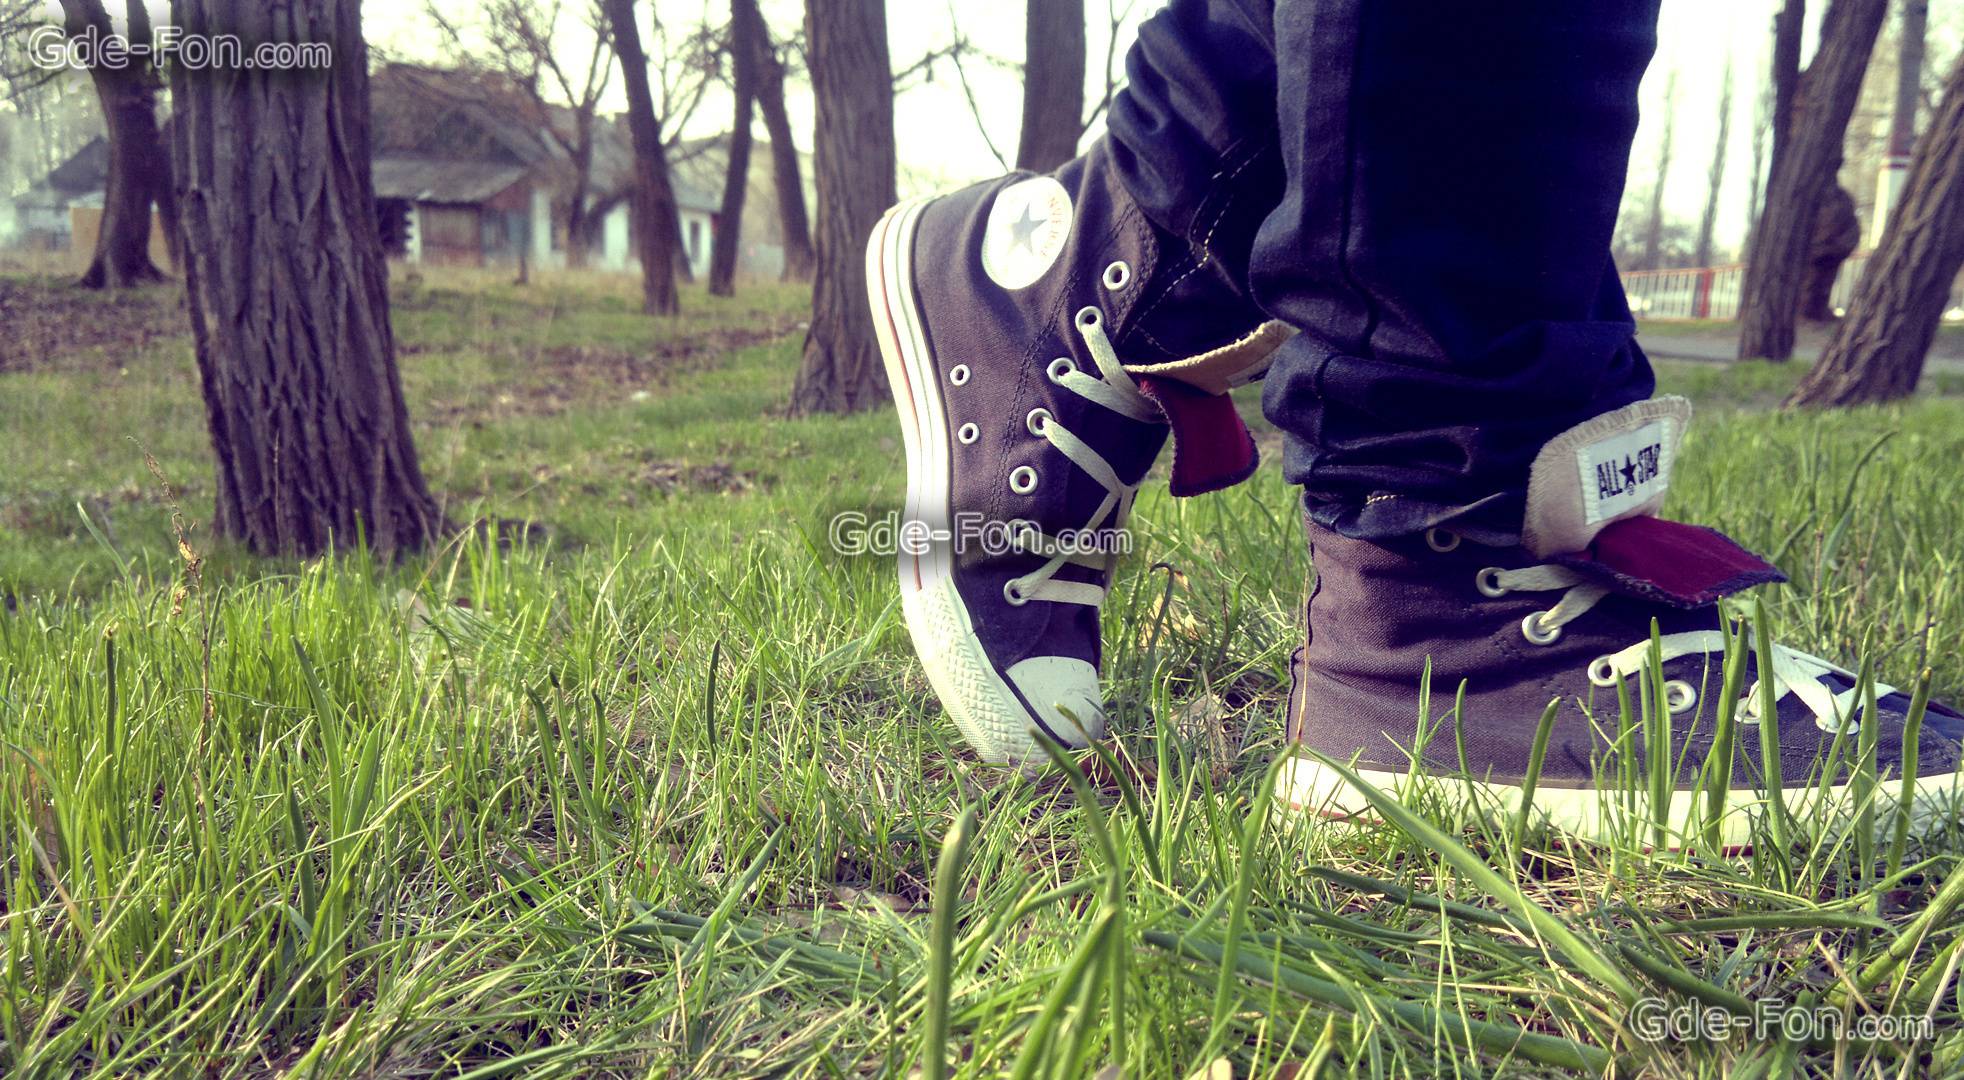 Download wallpaper All Star, converse, sneakers, grass free